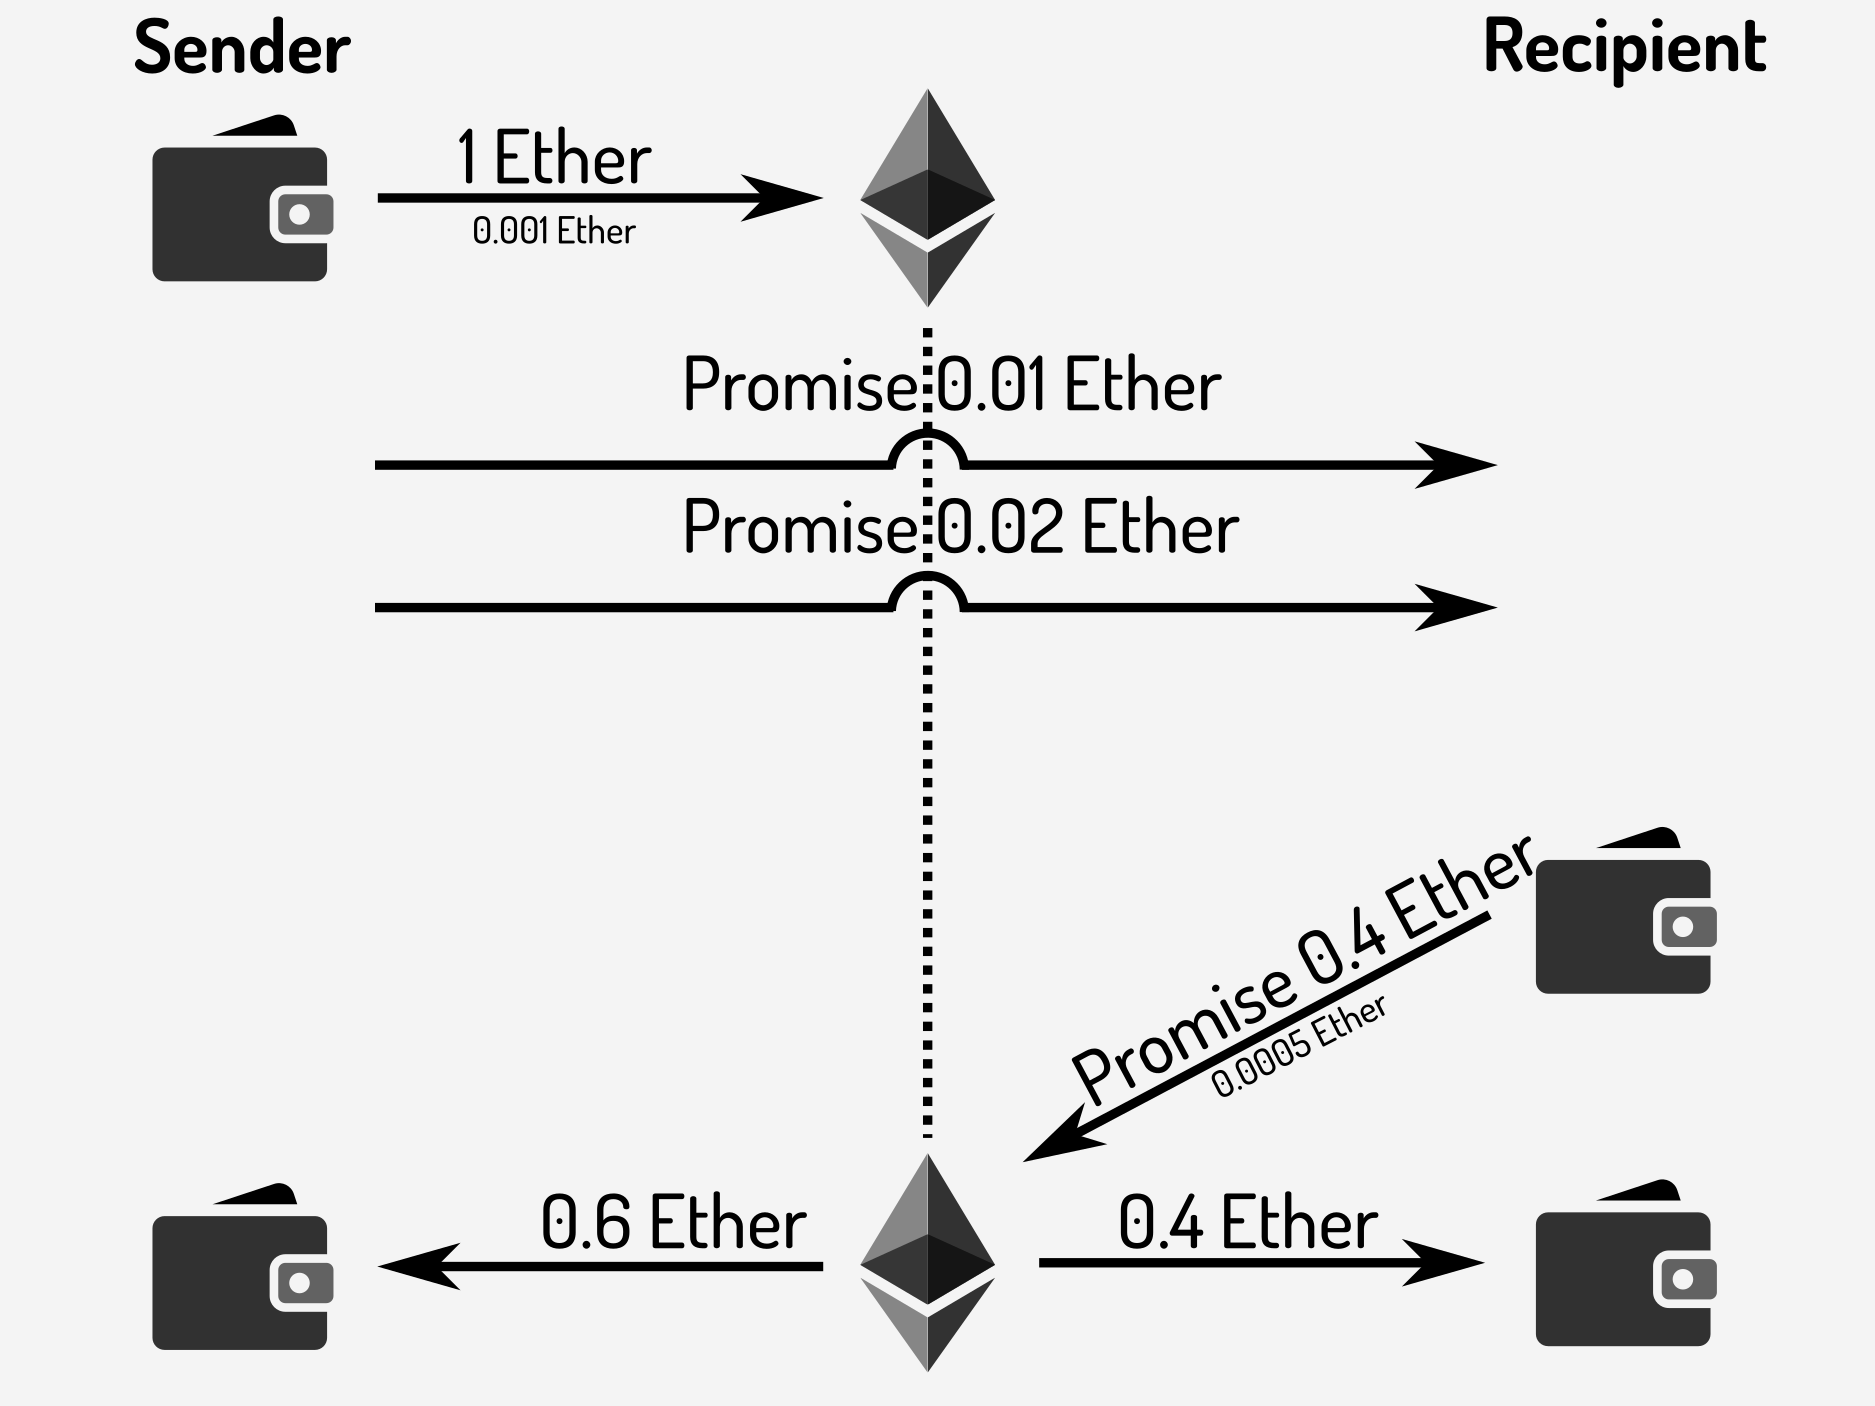 image from Introduction to Ethereum payment channels